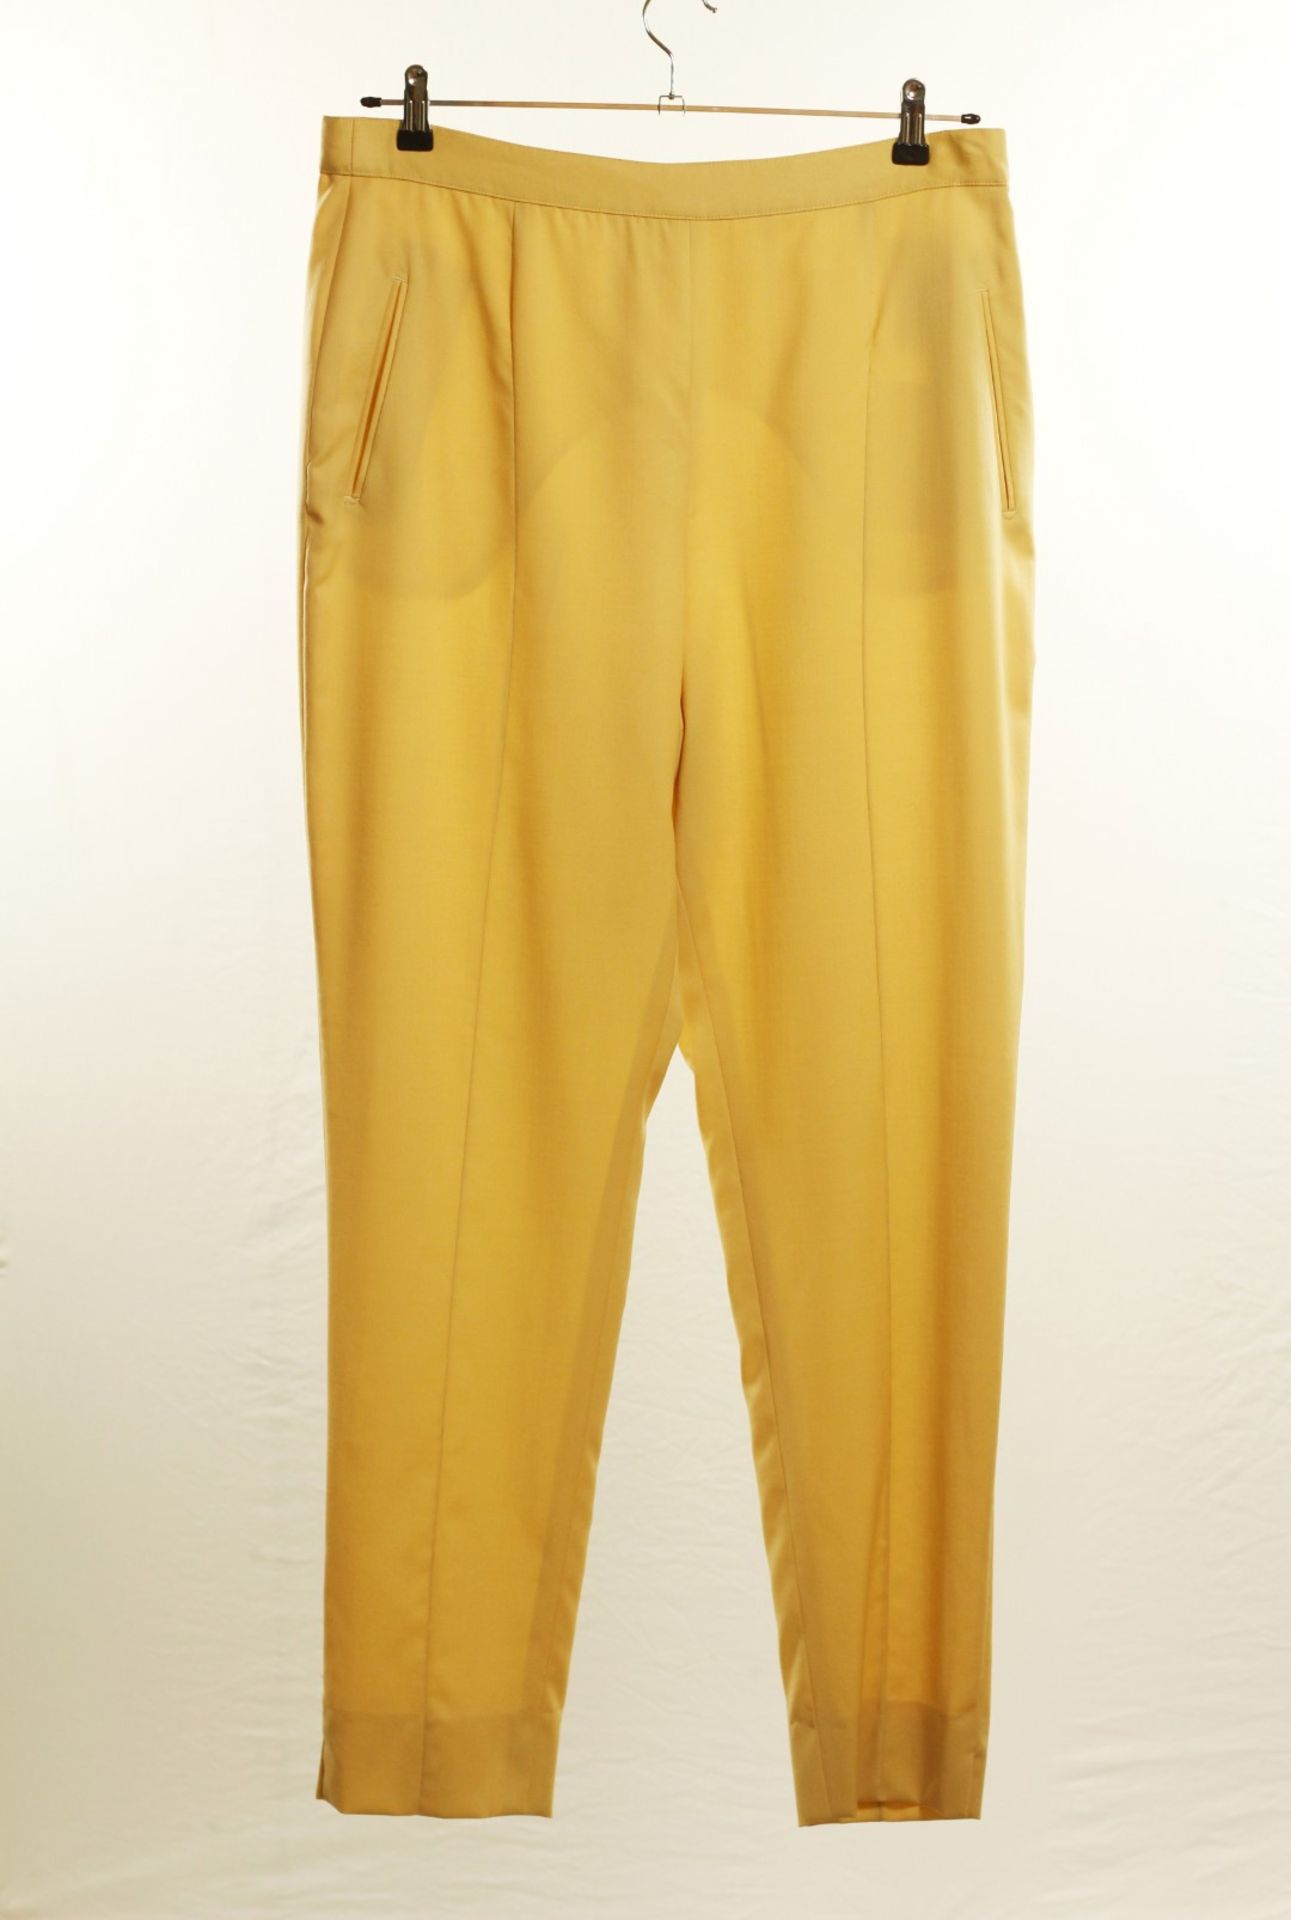 1 x Artico Cream Trousers - Size: 18 - Material: 100% Leather. Lining 50% viscose, 50% Acetate - - Image 8 of 9